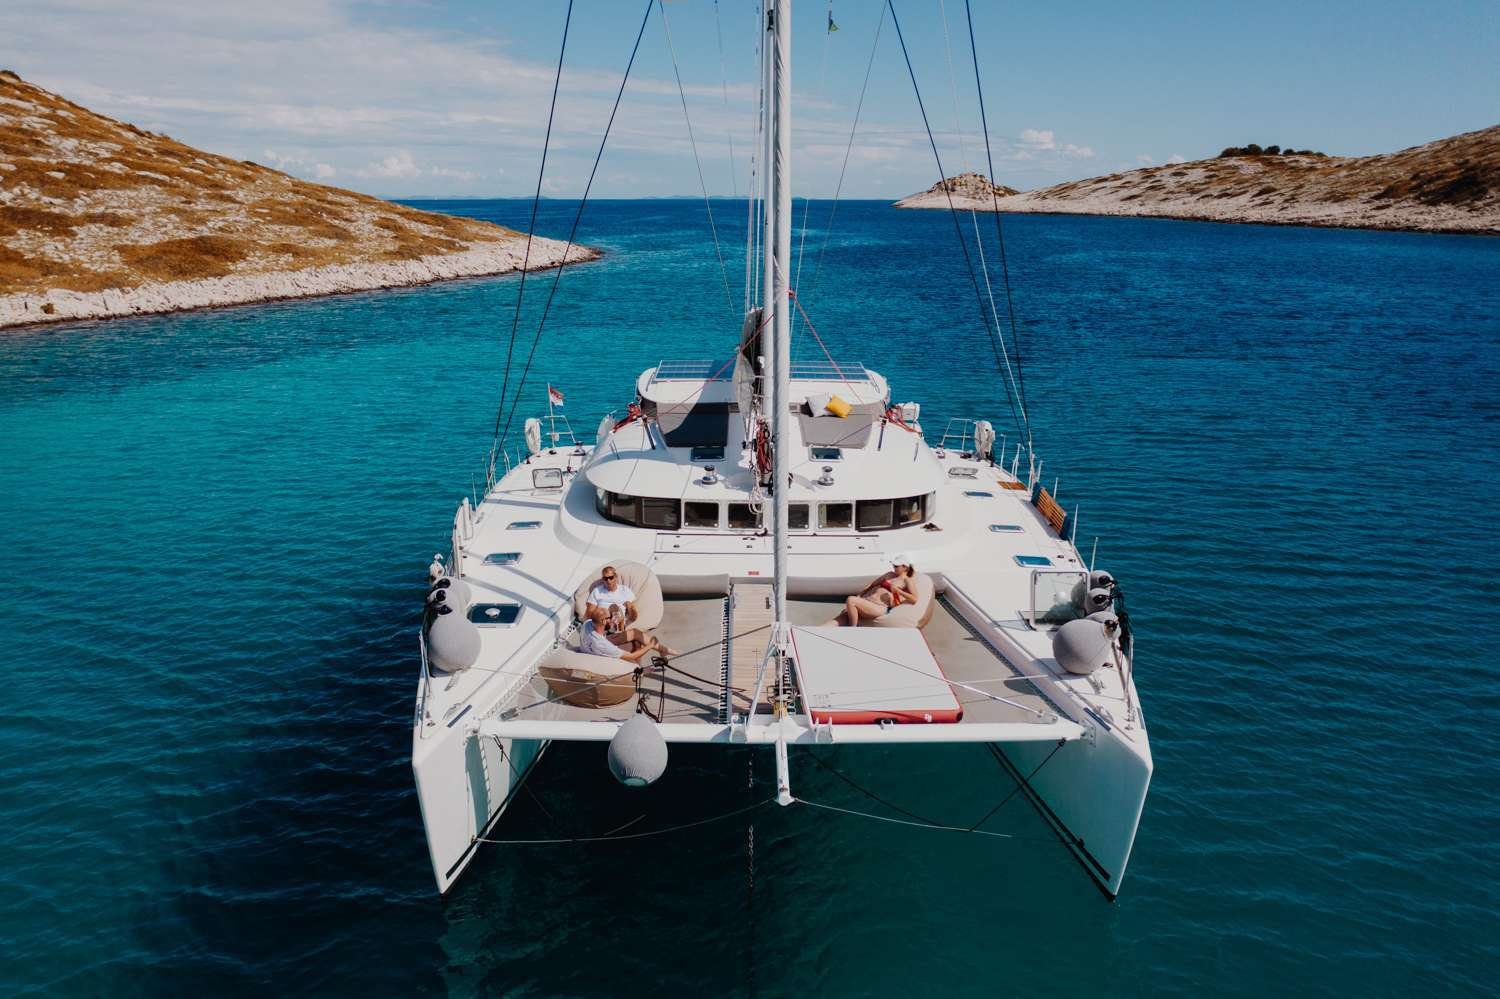 Affordable luxury crewed catamaran charter - Ideal for families